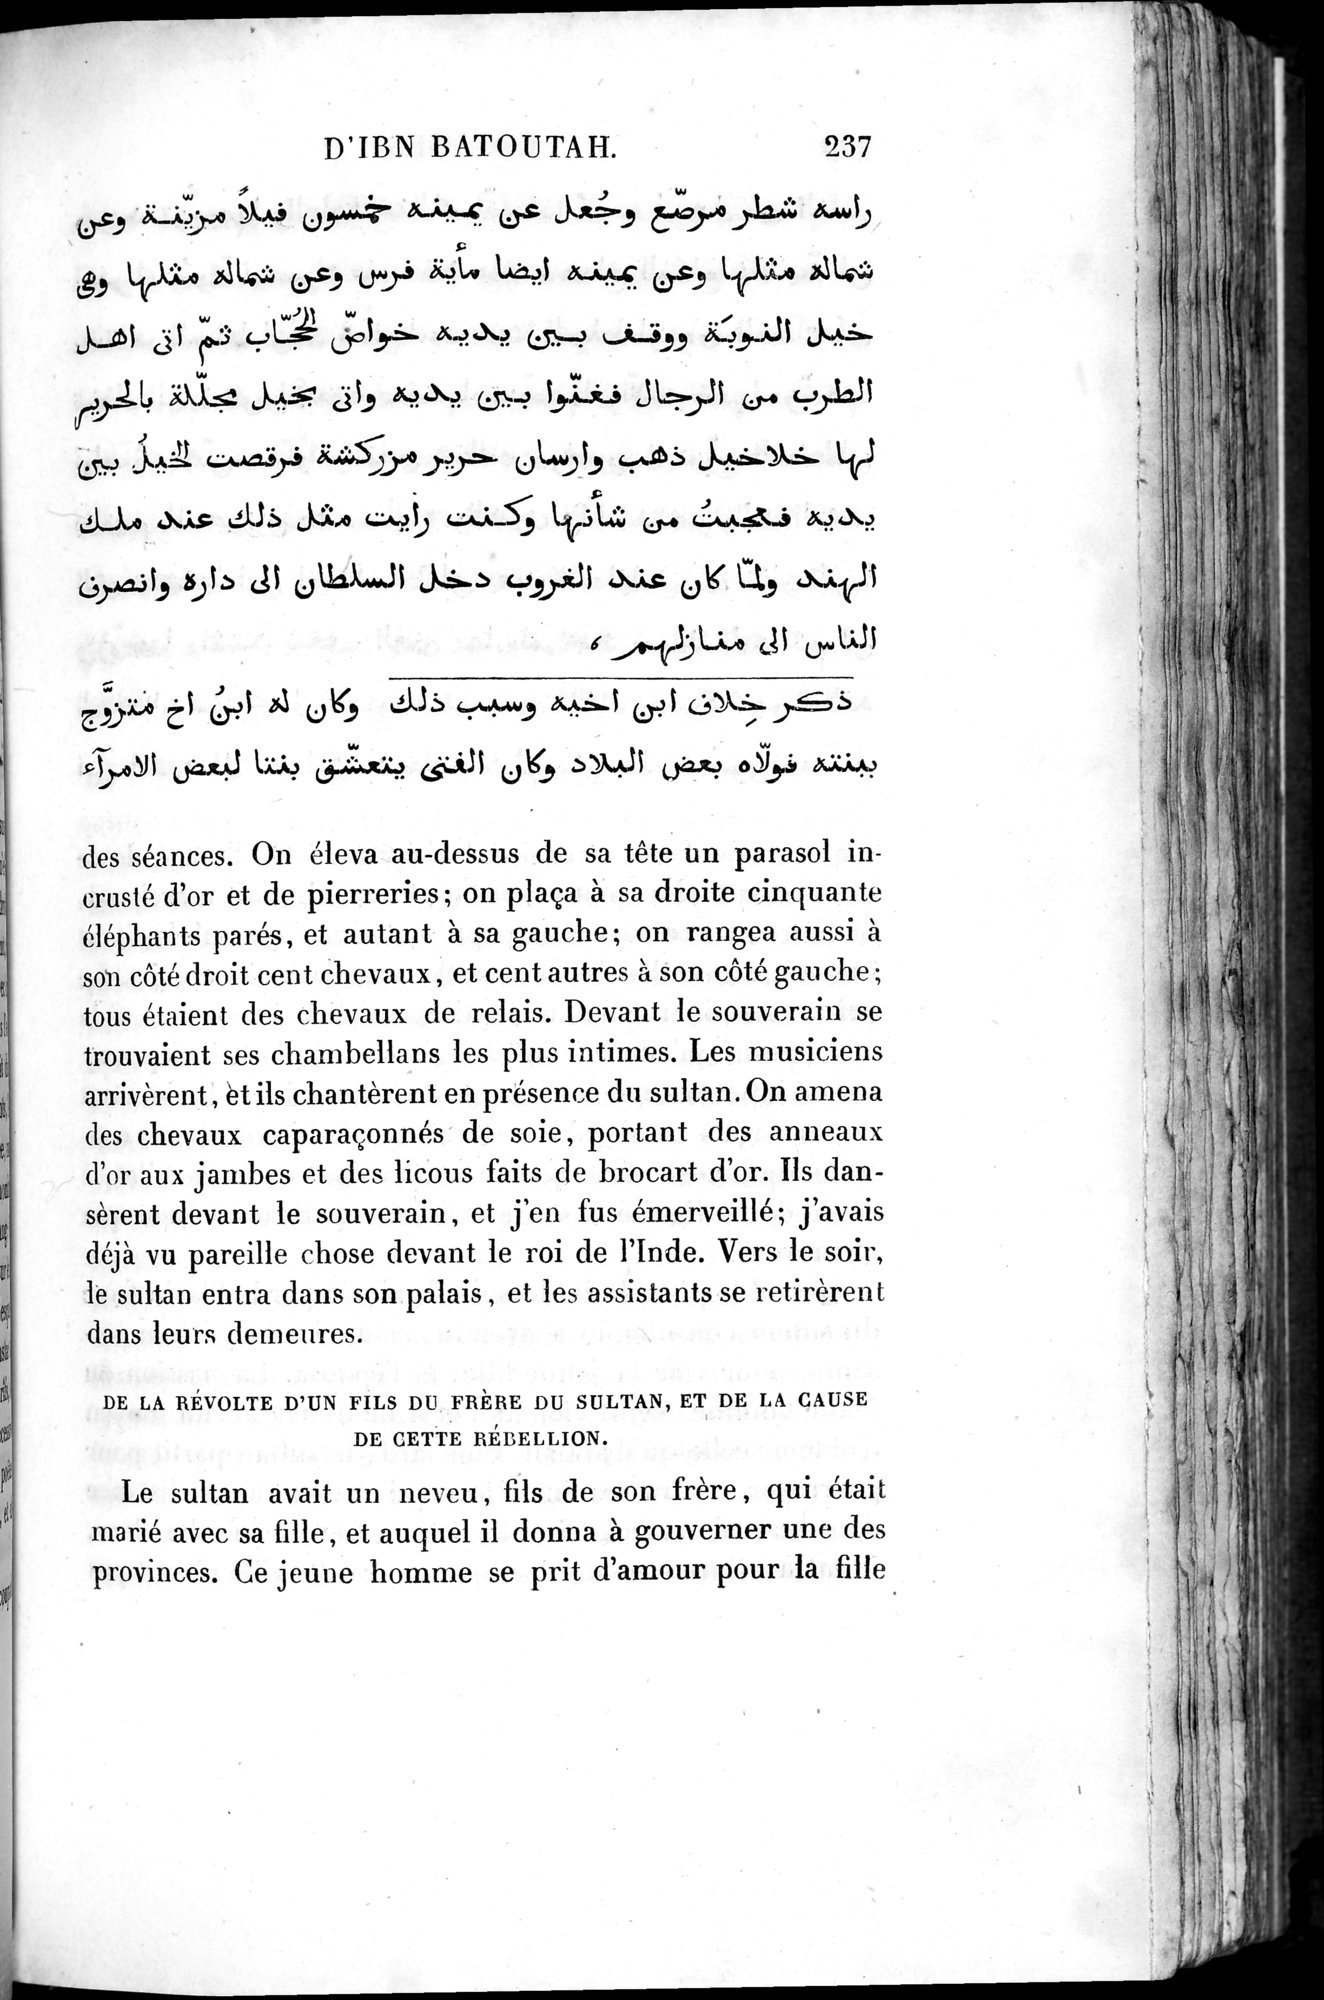 Voyages d'Ibn Batoutah : vol.4 / Page 249 (Grayscale High Resolution Image)